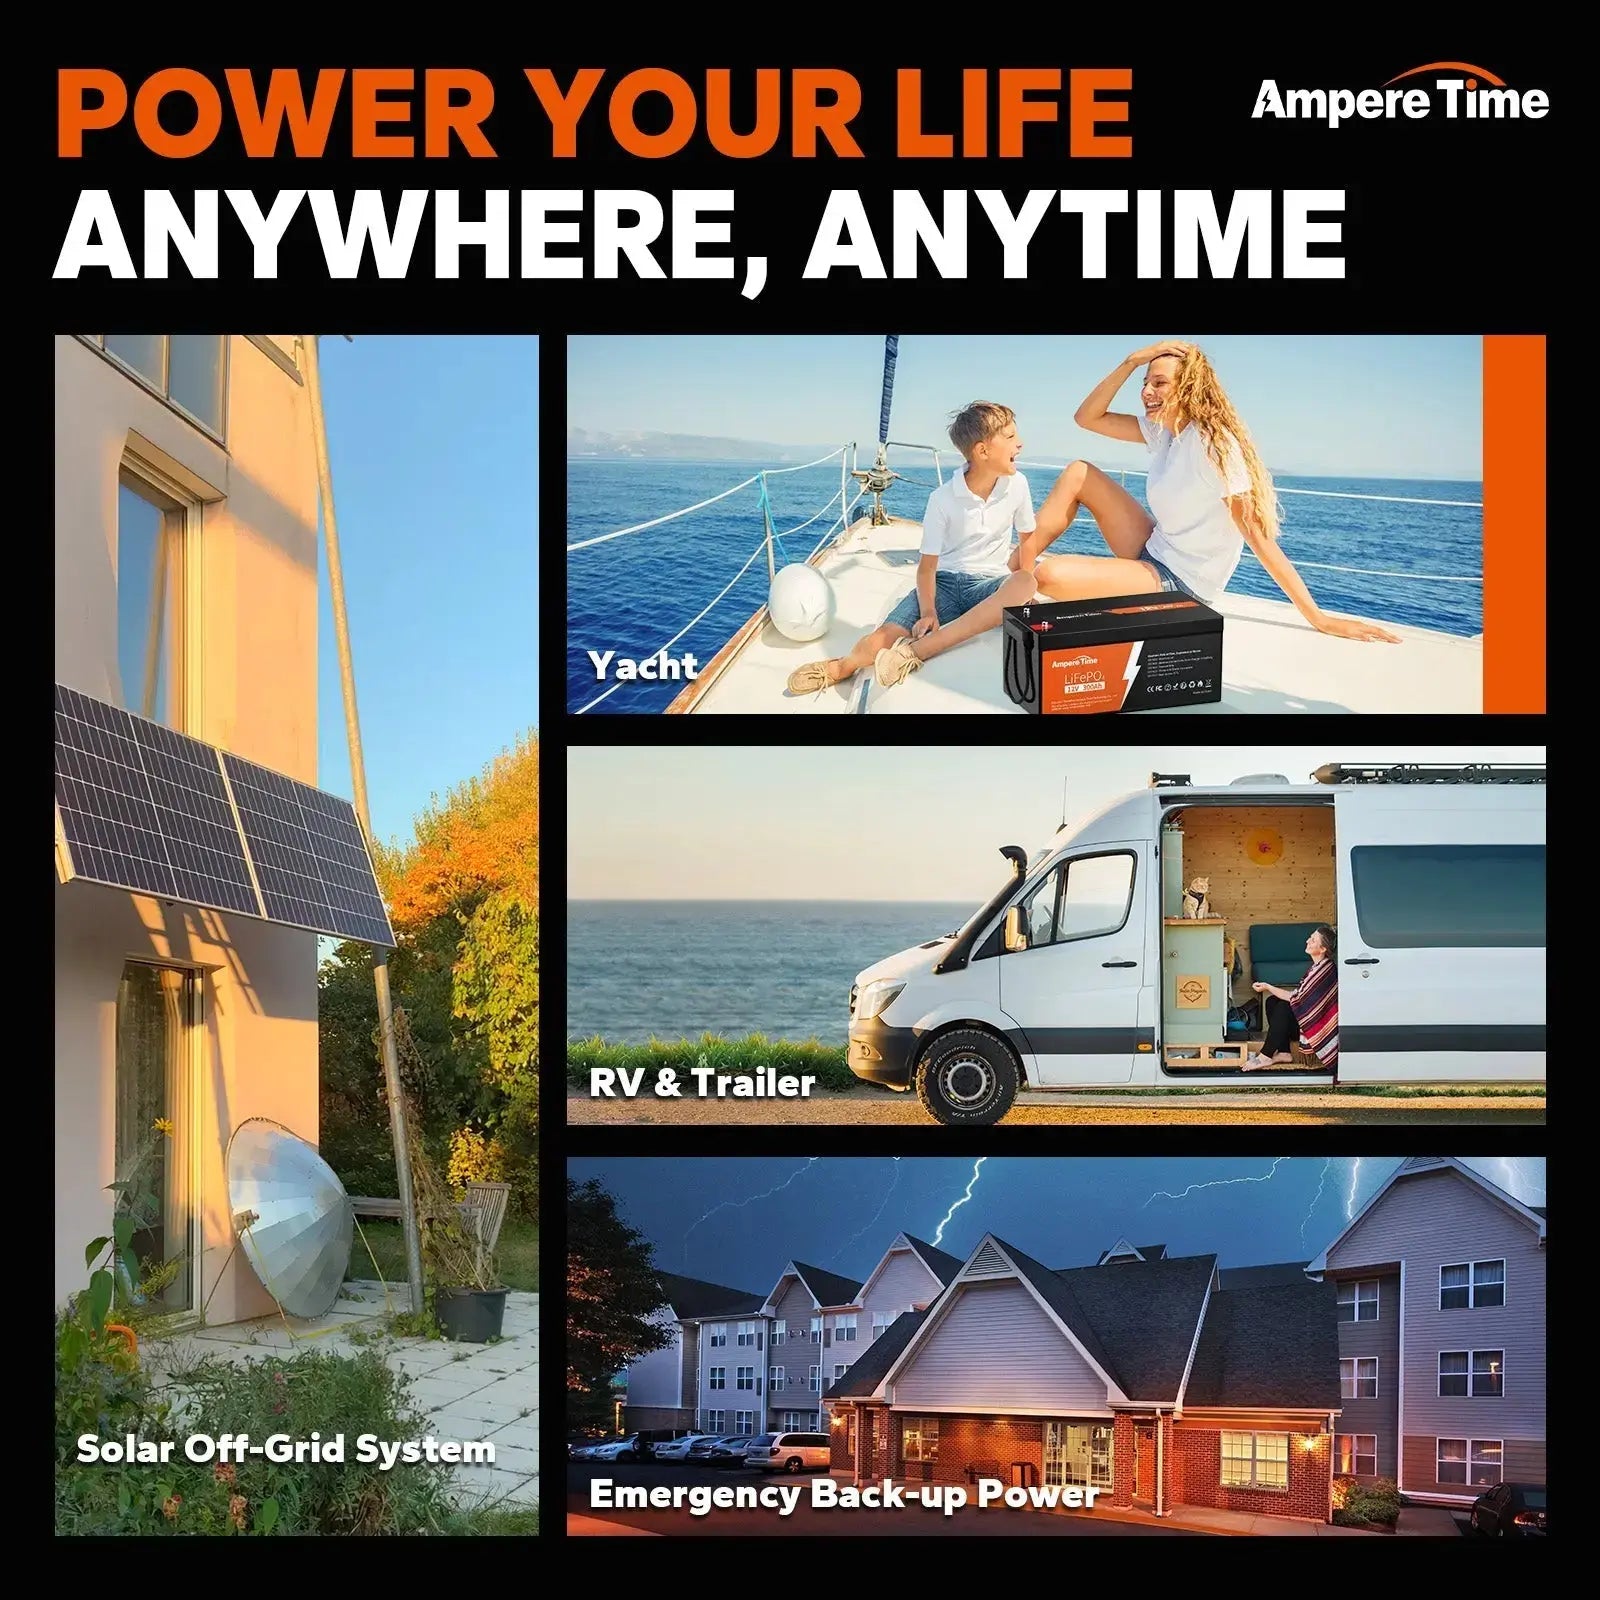 ✅Like New✅ Ampere Time 12V 300Ah, 3840Wh LiFePO4 Battery & Built in 200A BMS Ampere Time